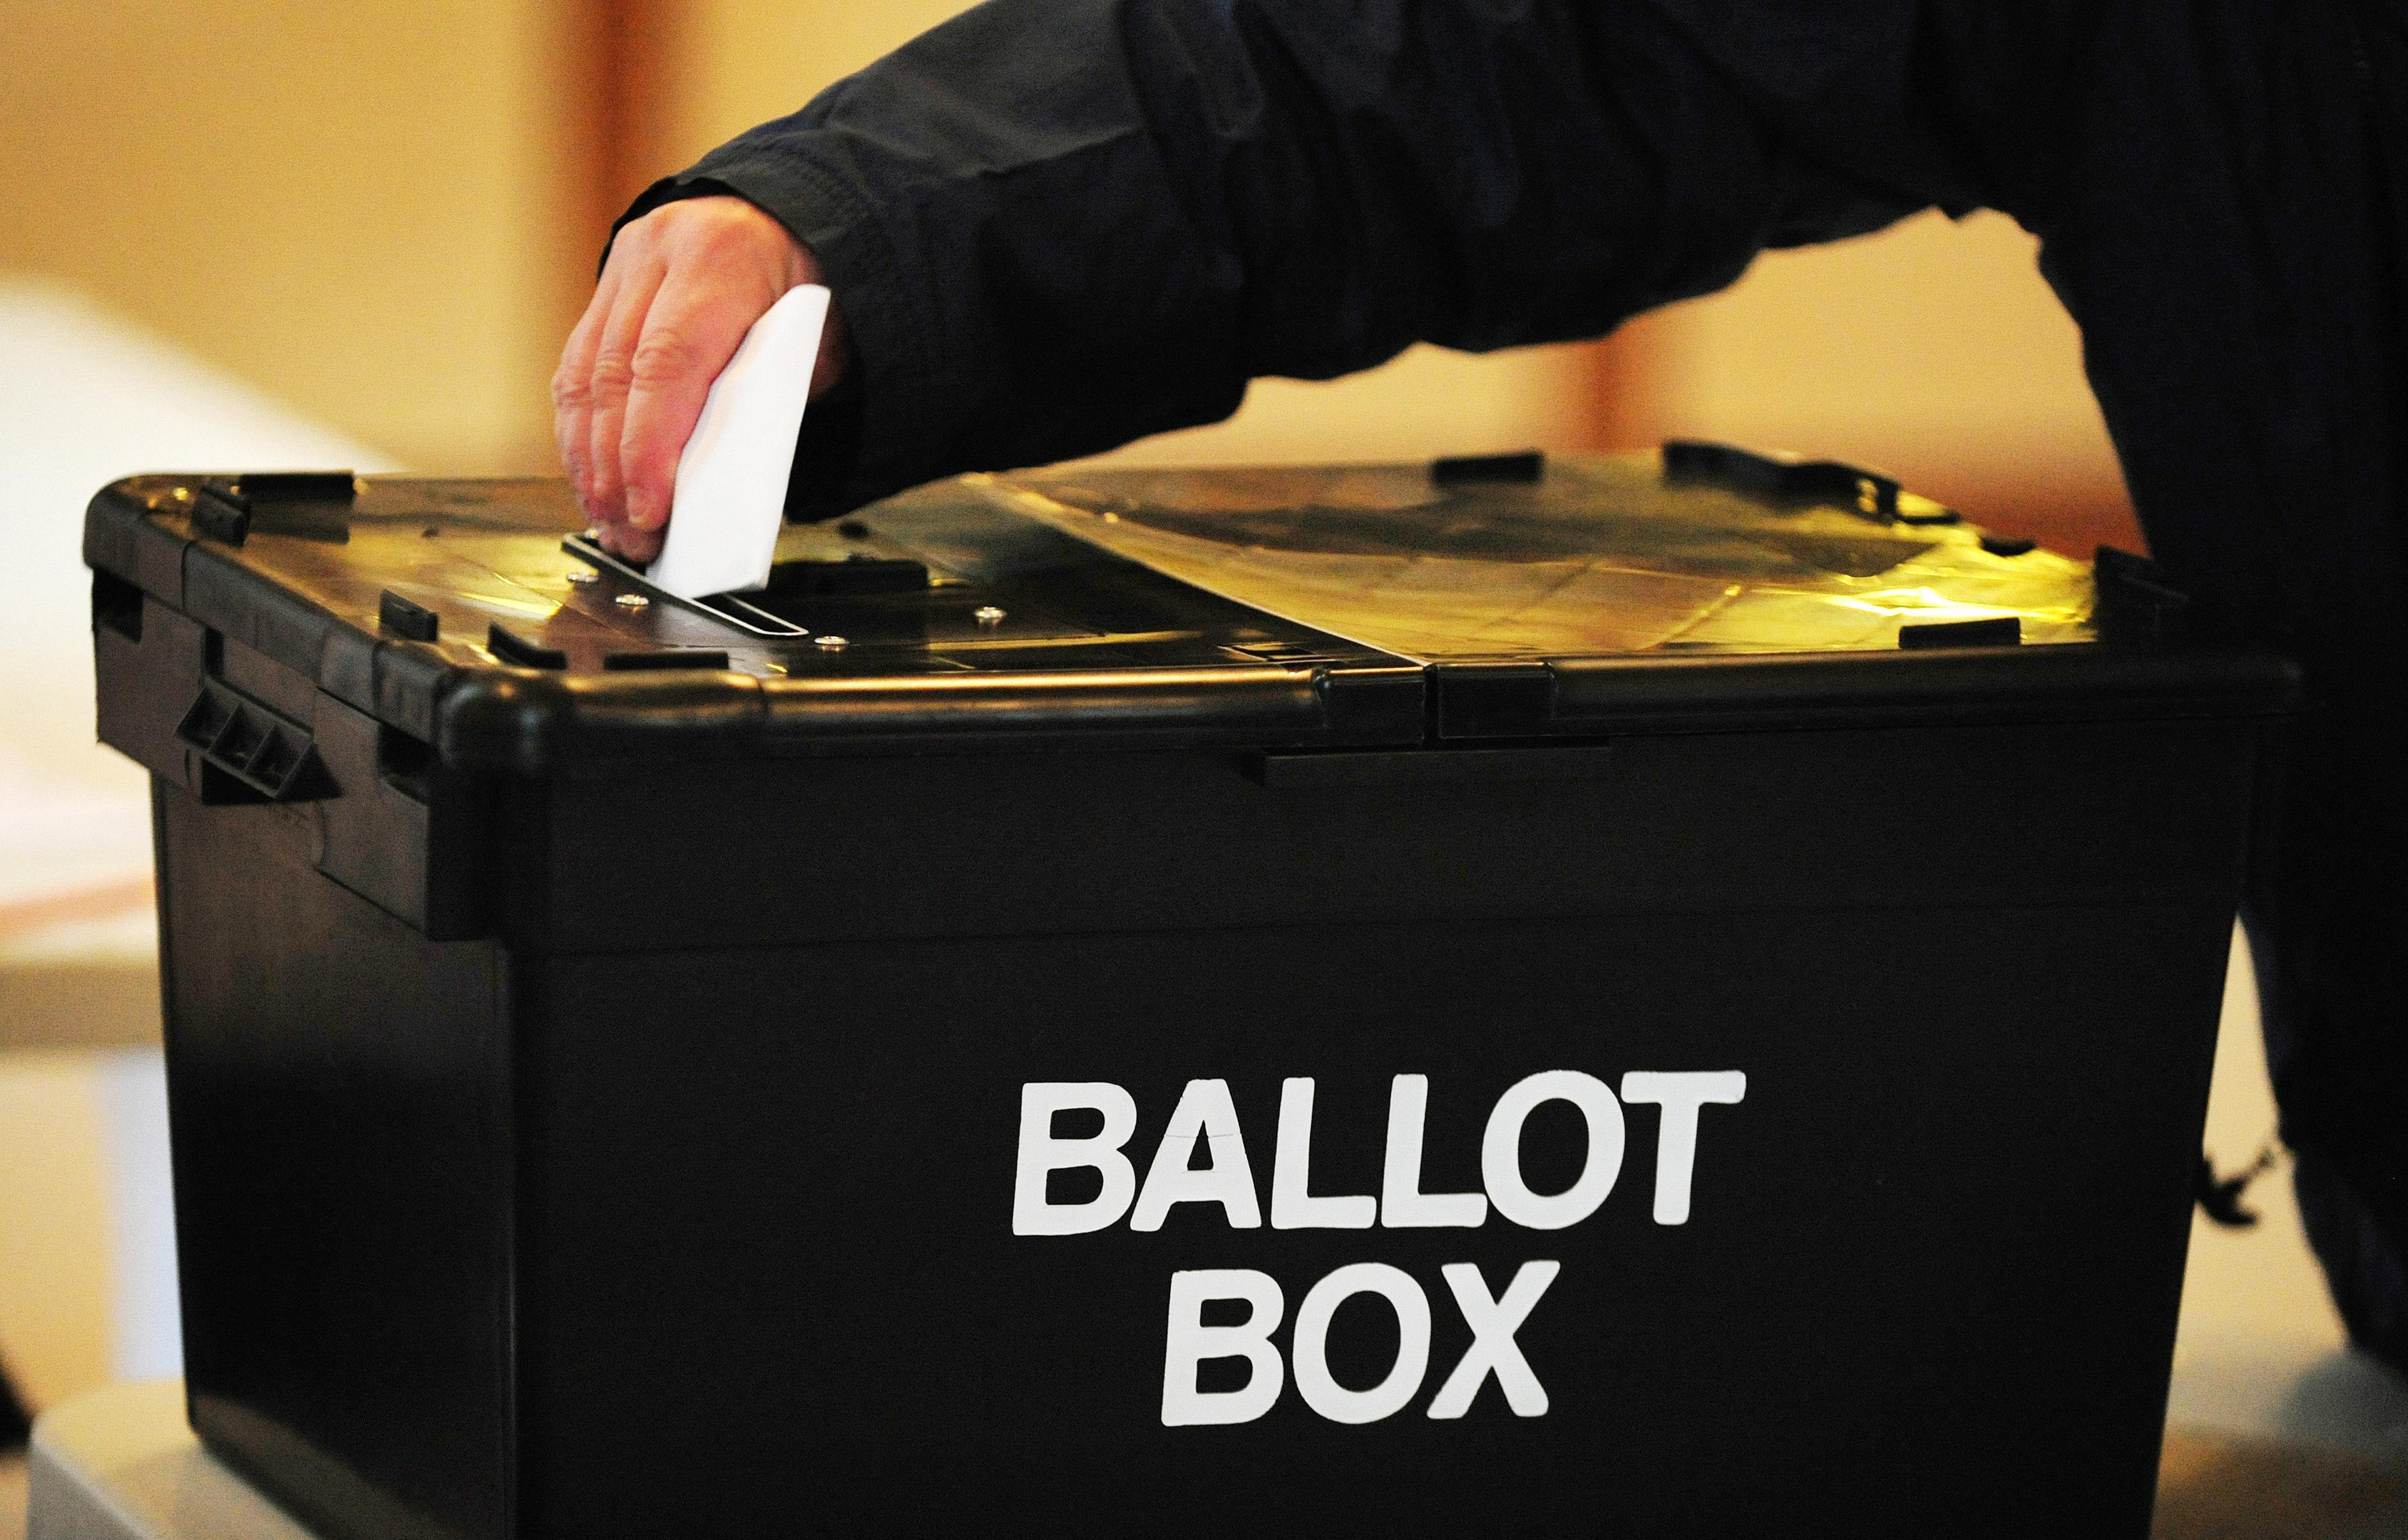 Voters 'won't back Tories in 2015'